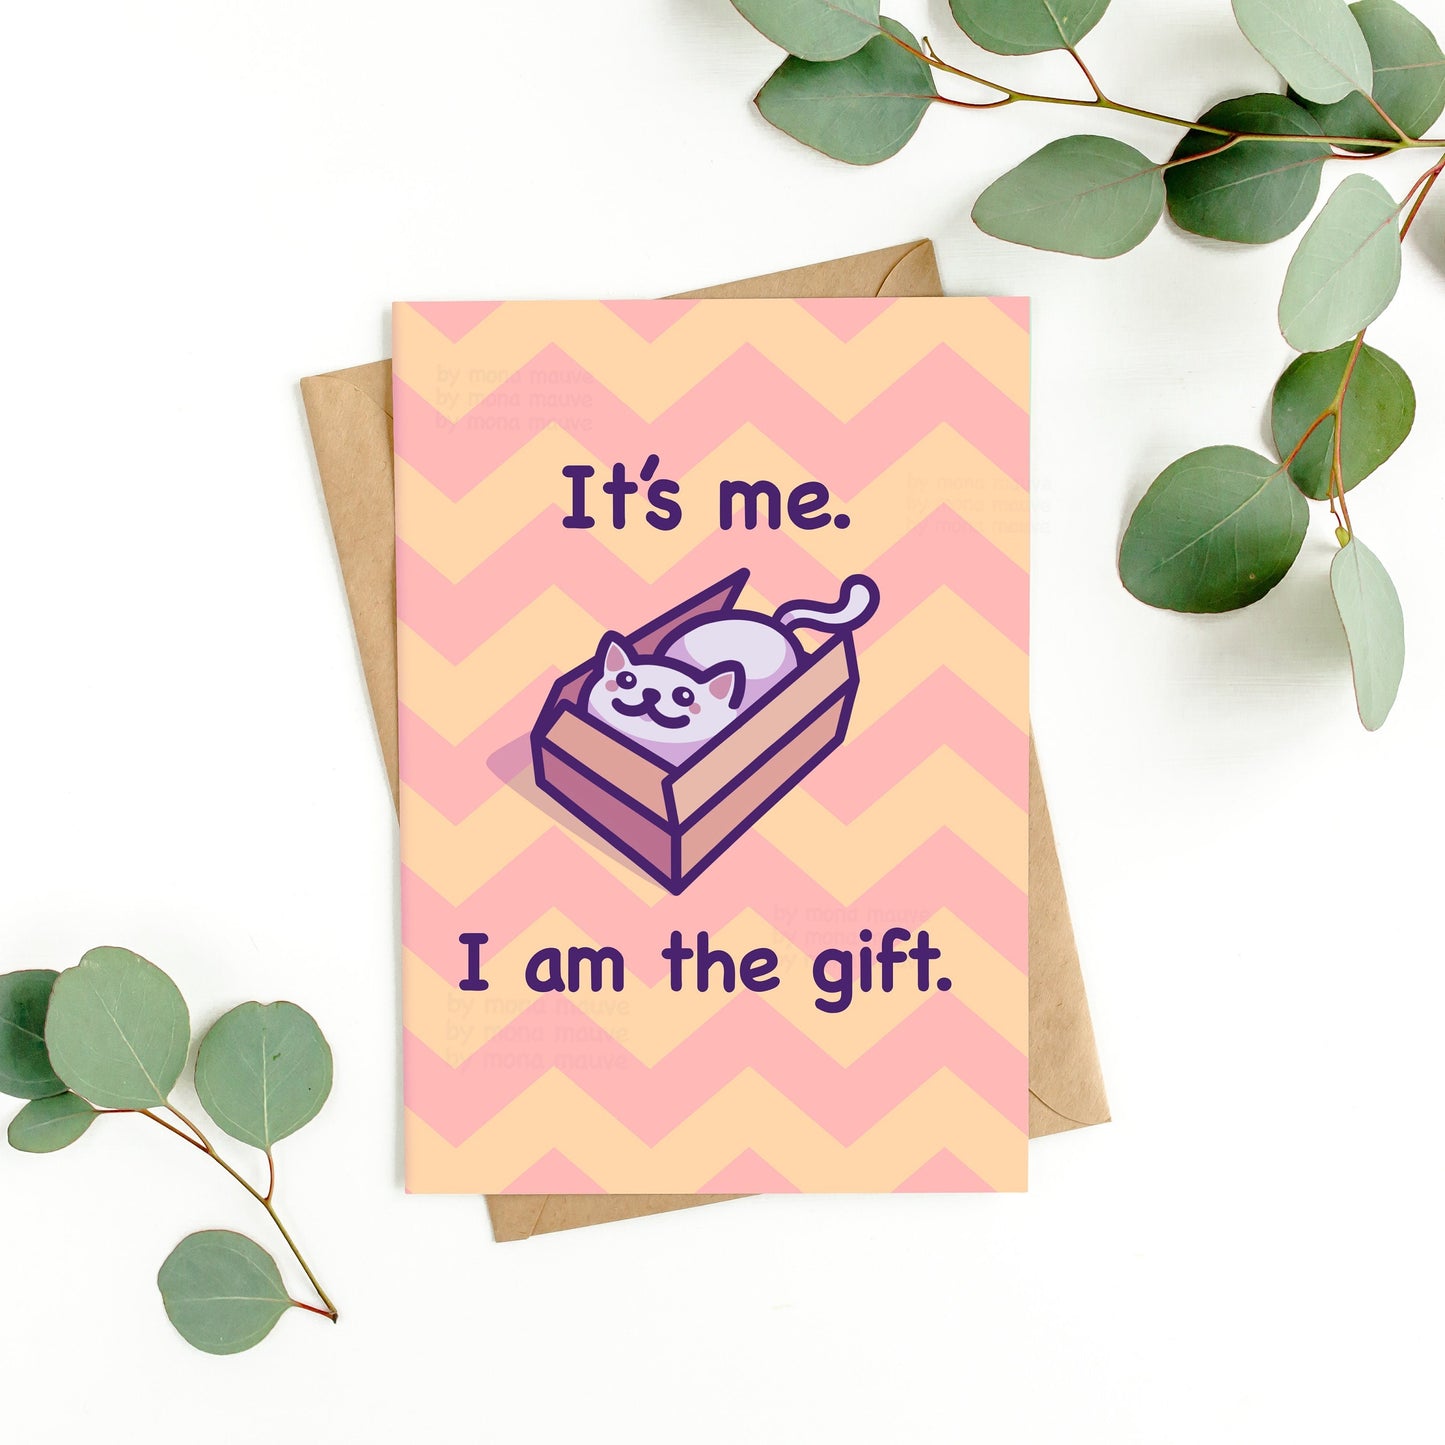 Funny Birthday or Just Because Card | It’s Me, I Am the Gift! | Cute Cat Card for Dad, Mom, Grandma, Grandpa, Best Friend - Her or Him